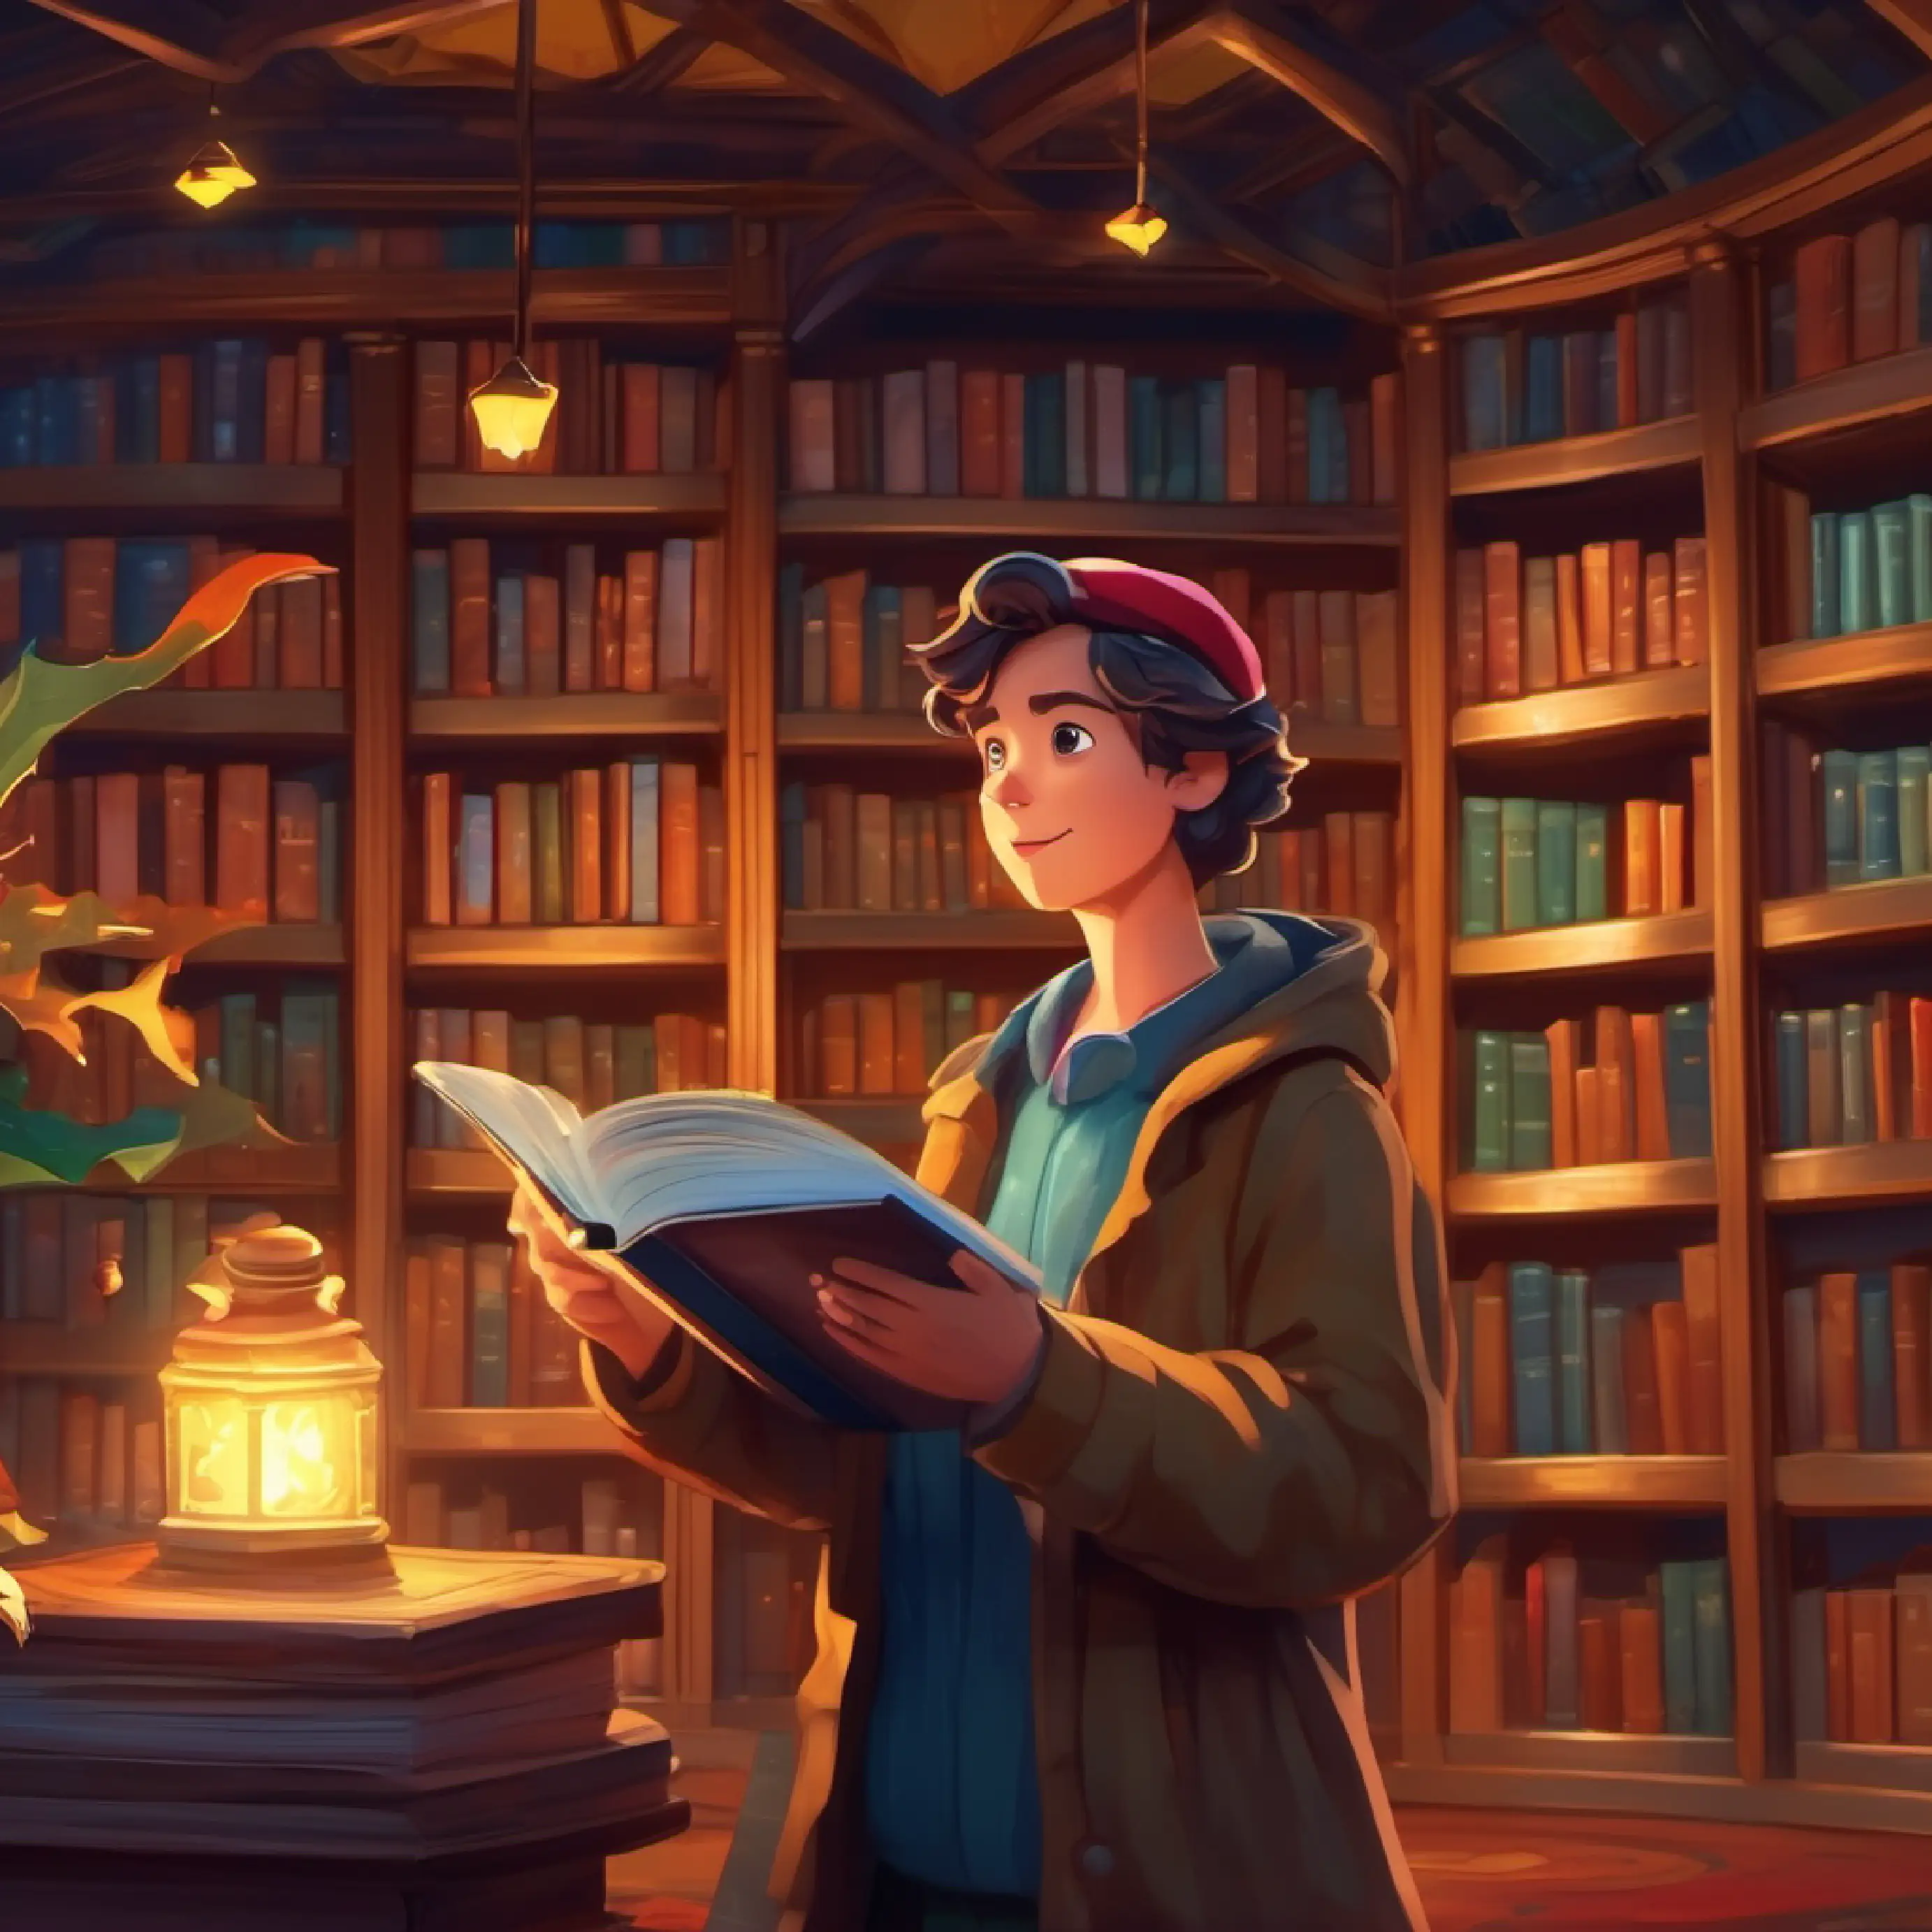 Main character discovers a library with supernatural occurrences.